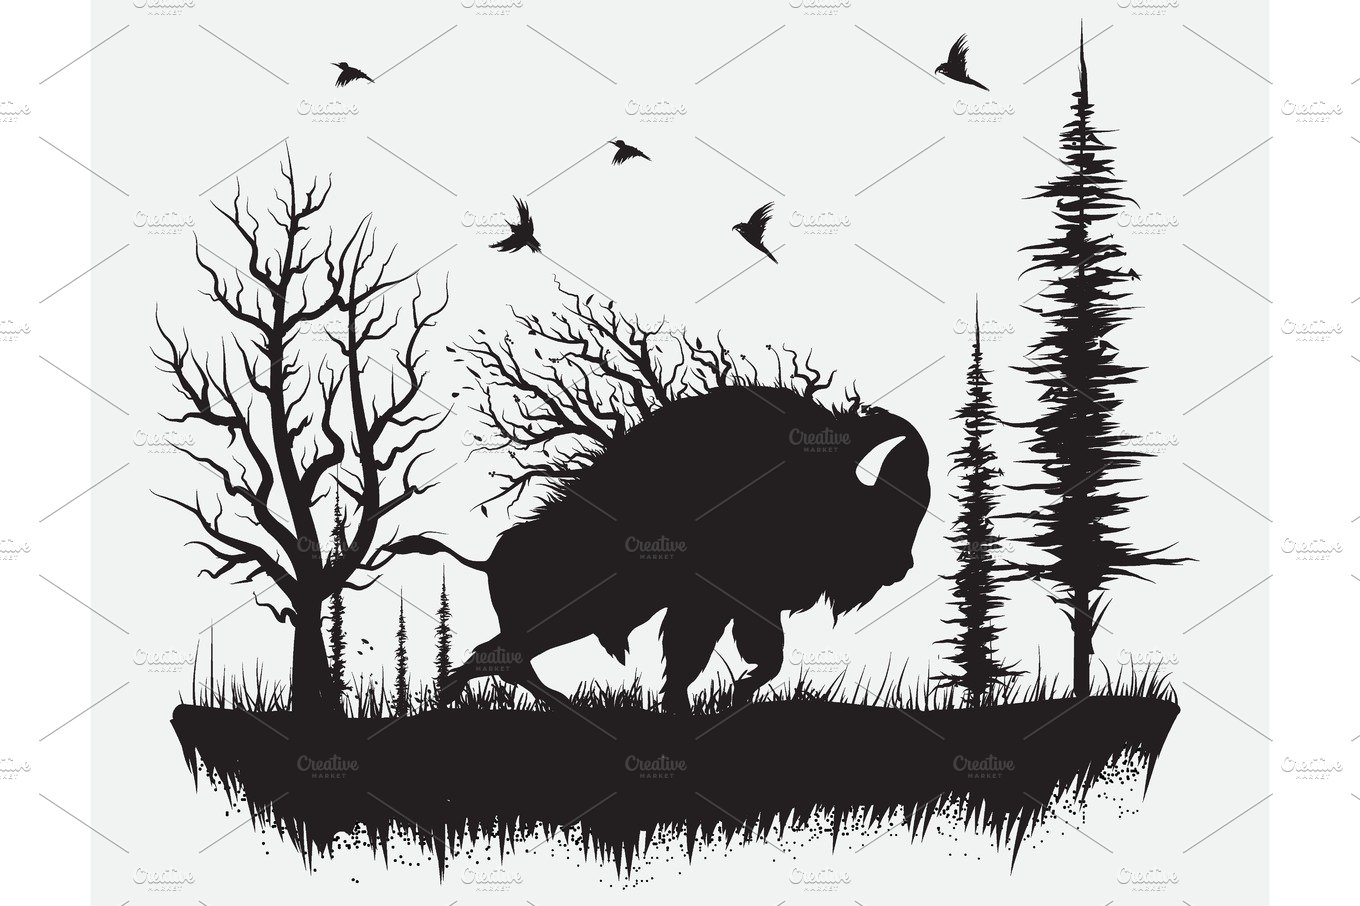 Buffalo walking in the forest cover image.